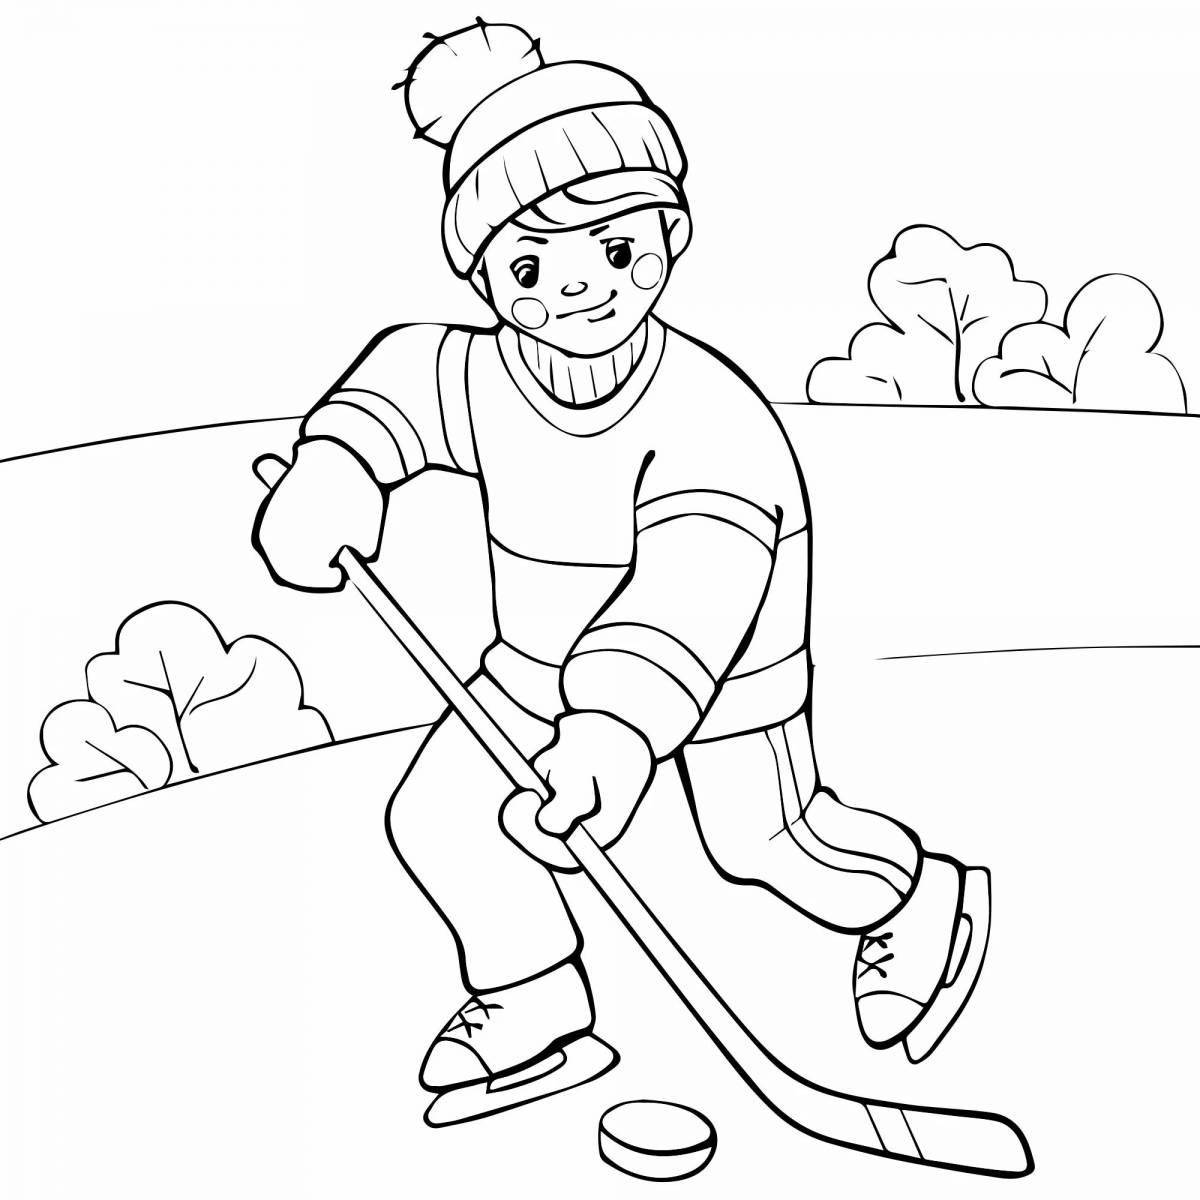 Elegant winter sports coloring book for kids